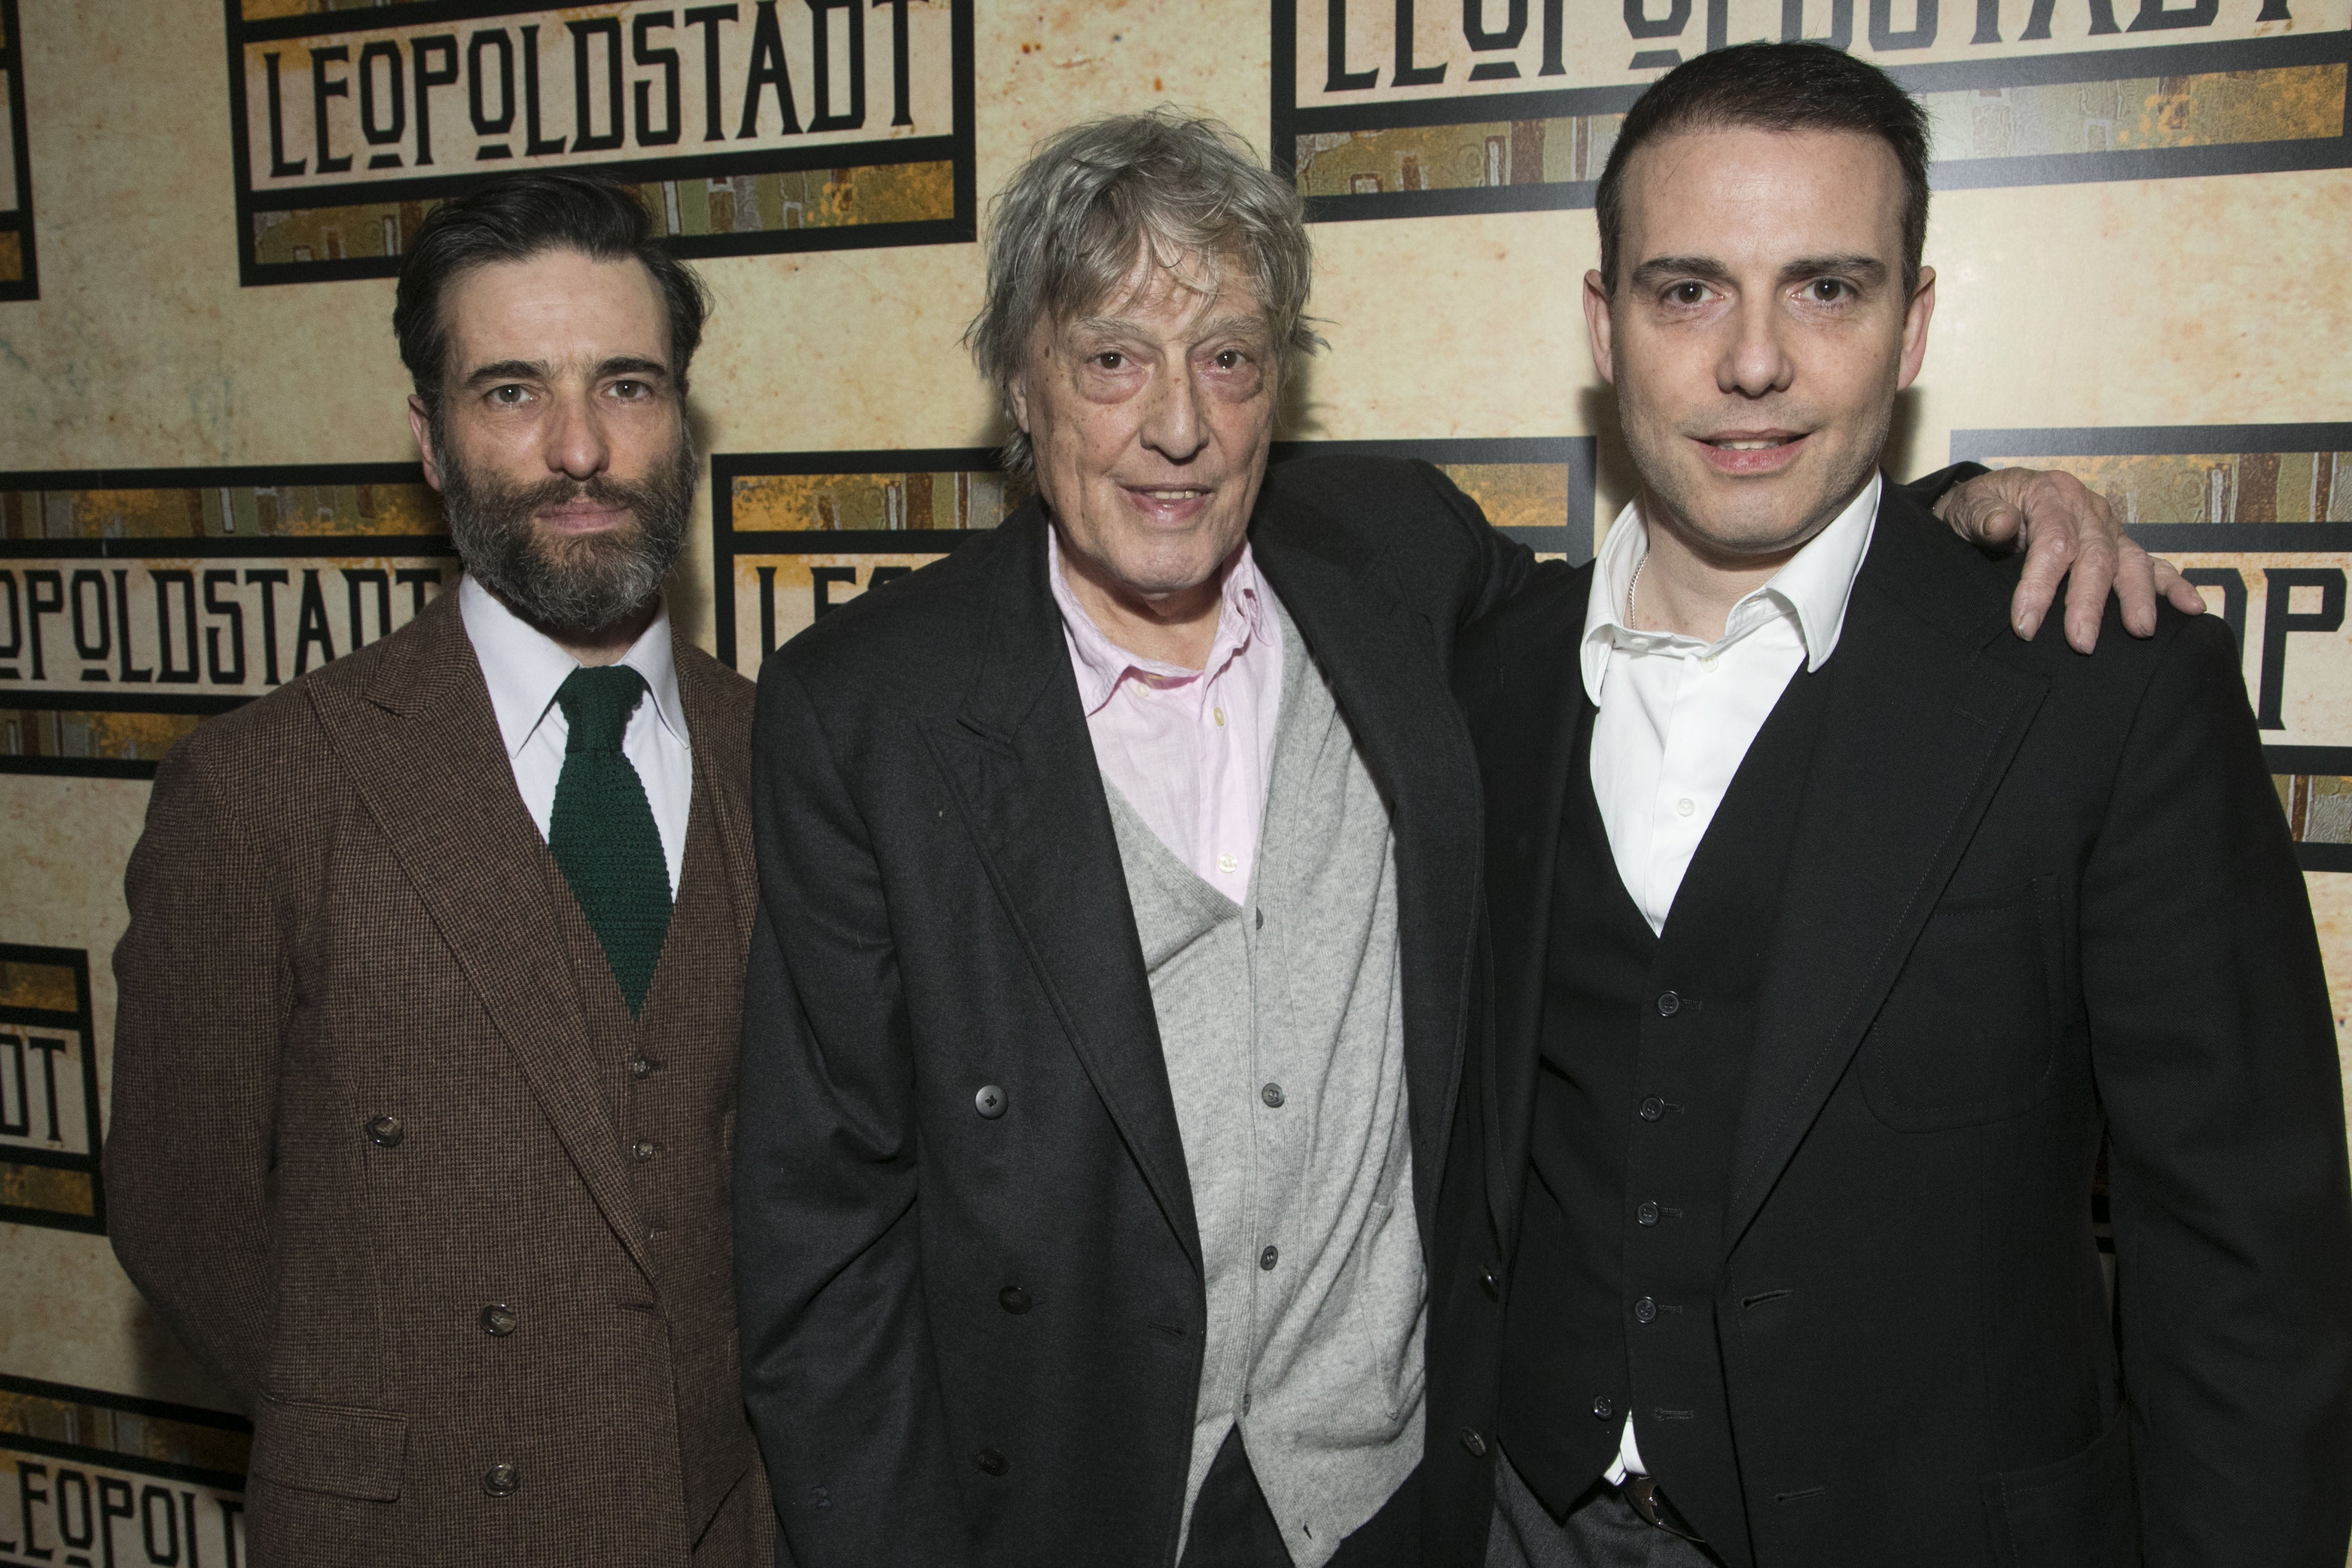 Family affair: Tom Stoppard with his sons Ed (left, who plays Ludwig) and Will at the ‘Leopoldstadt’ press night in 2020